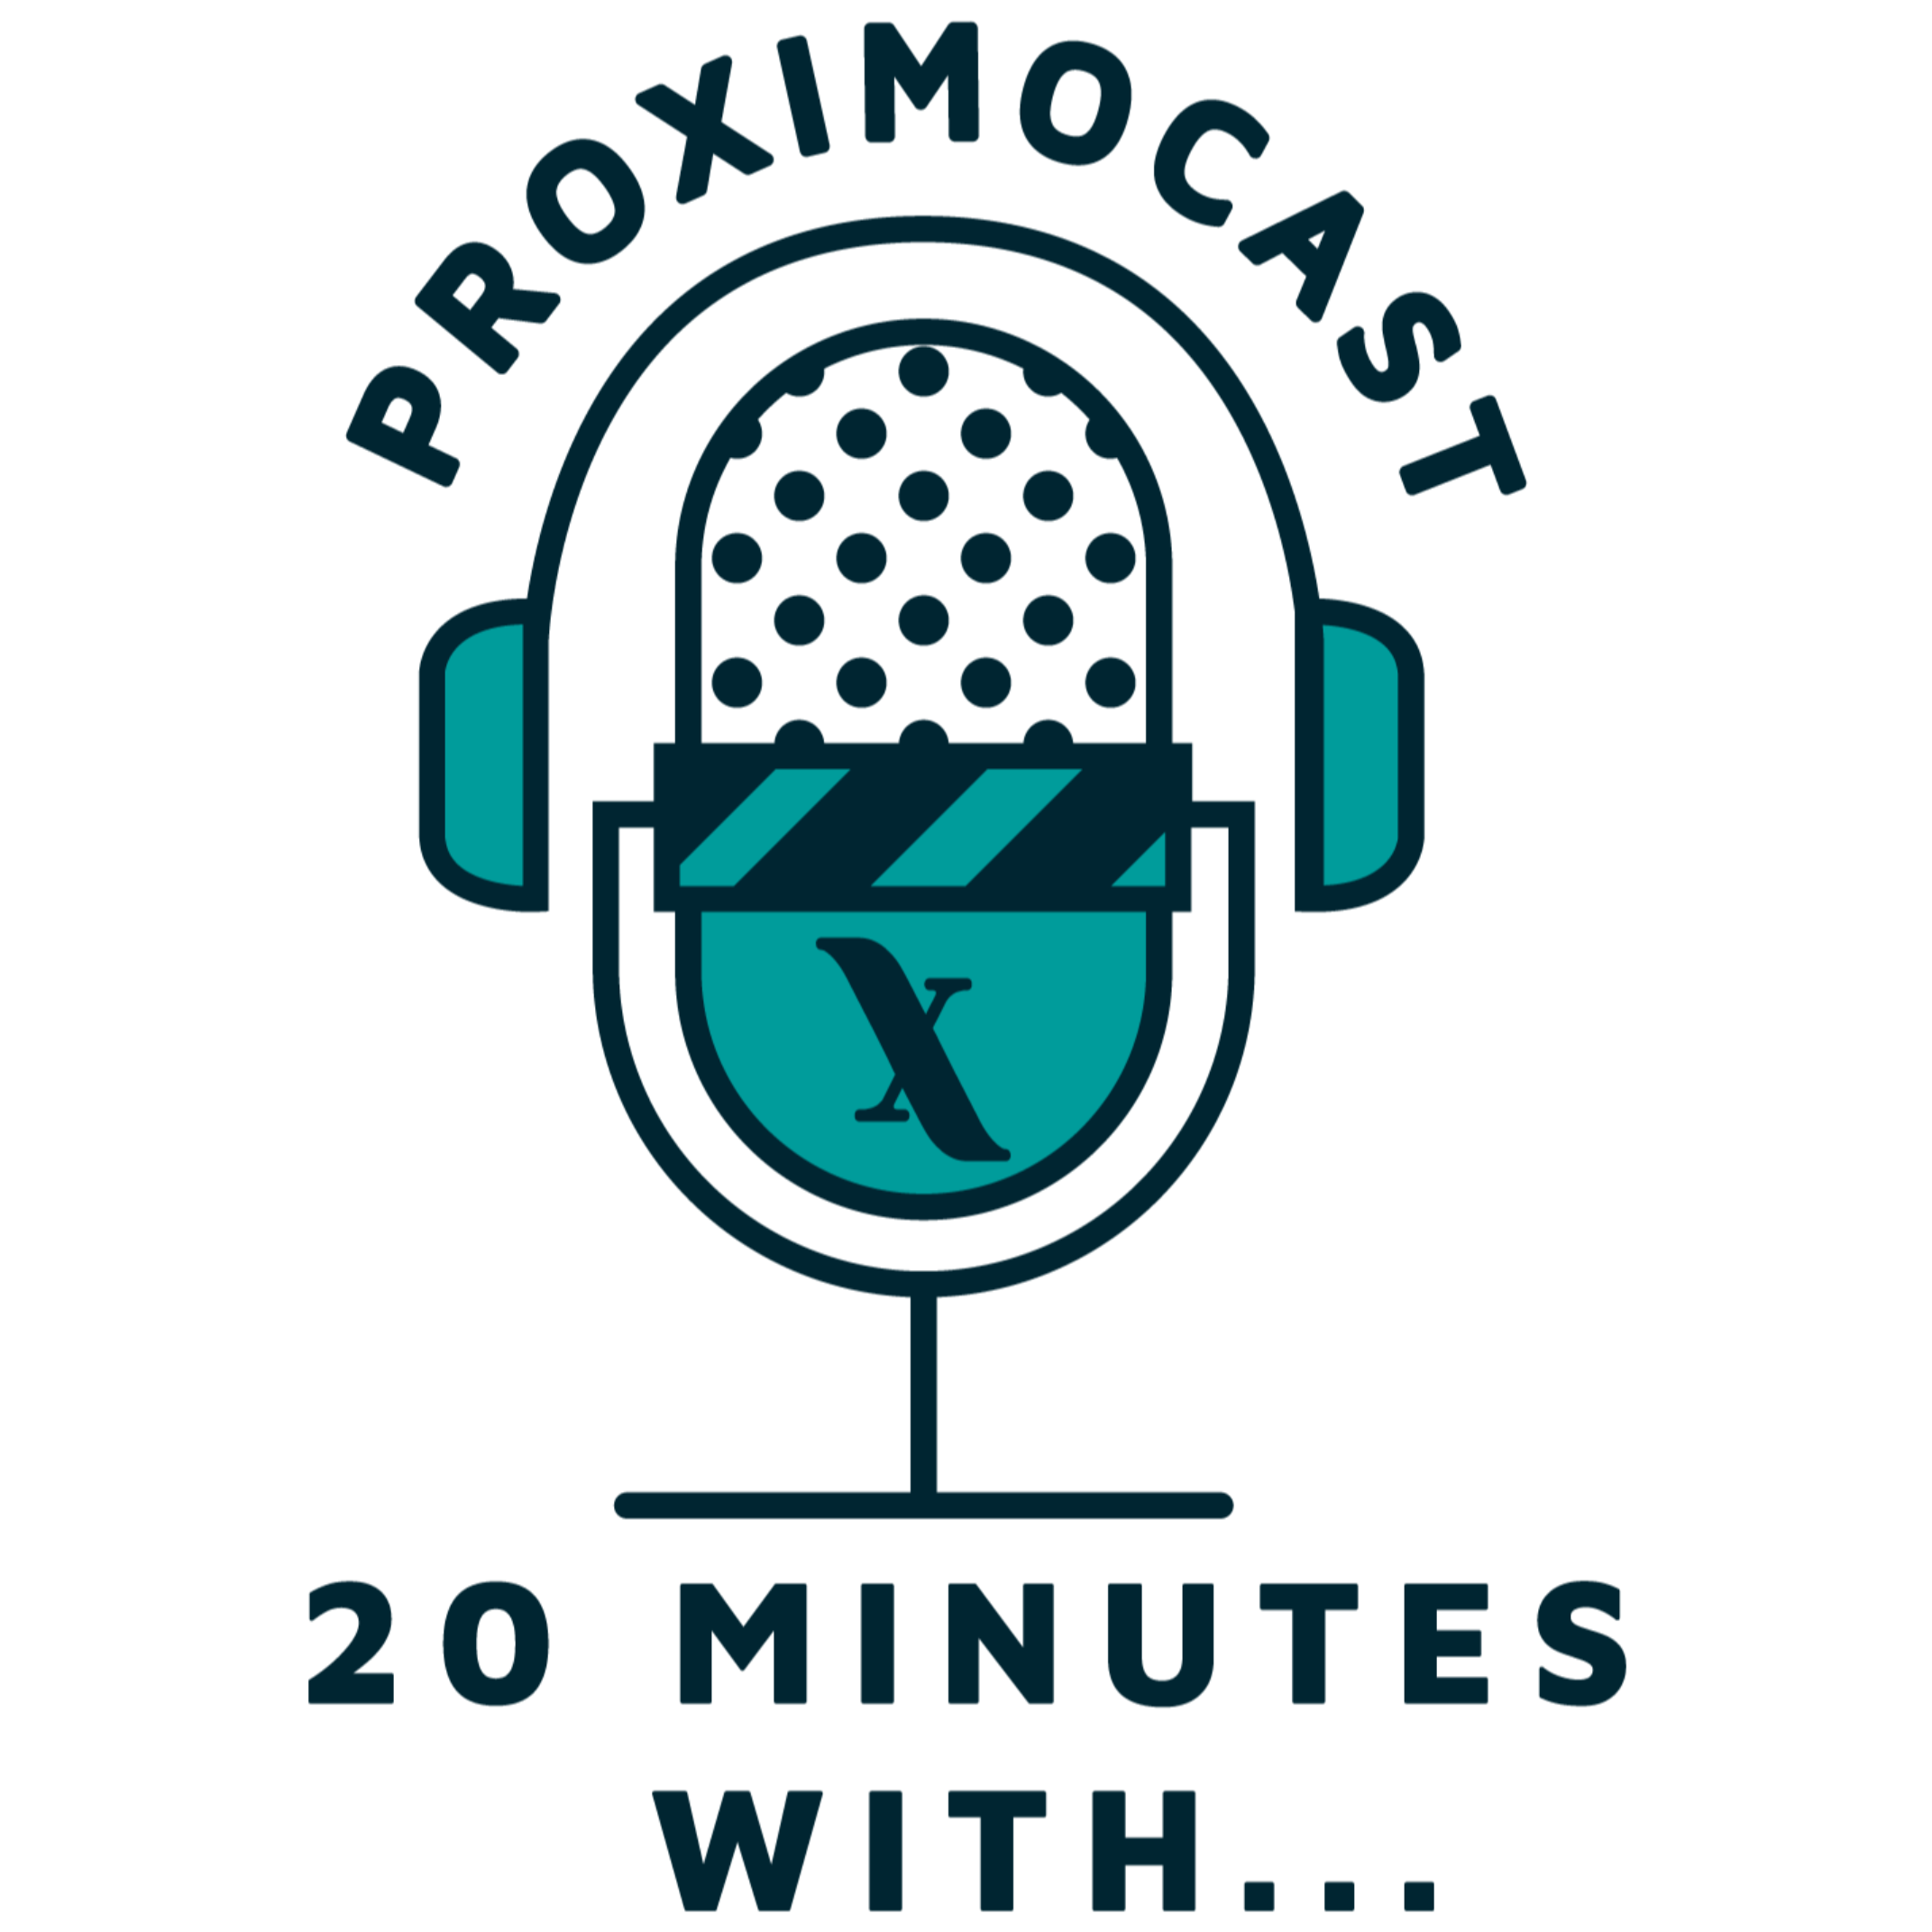 Proximocast: 20 minutes with...